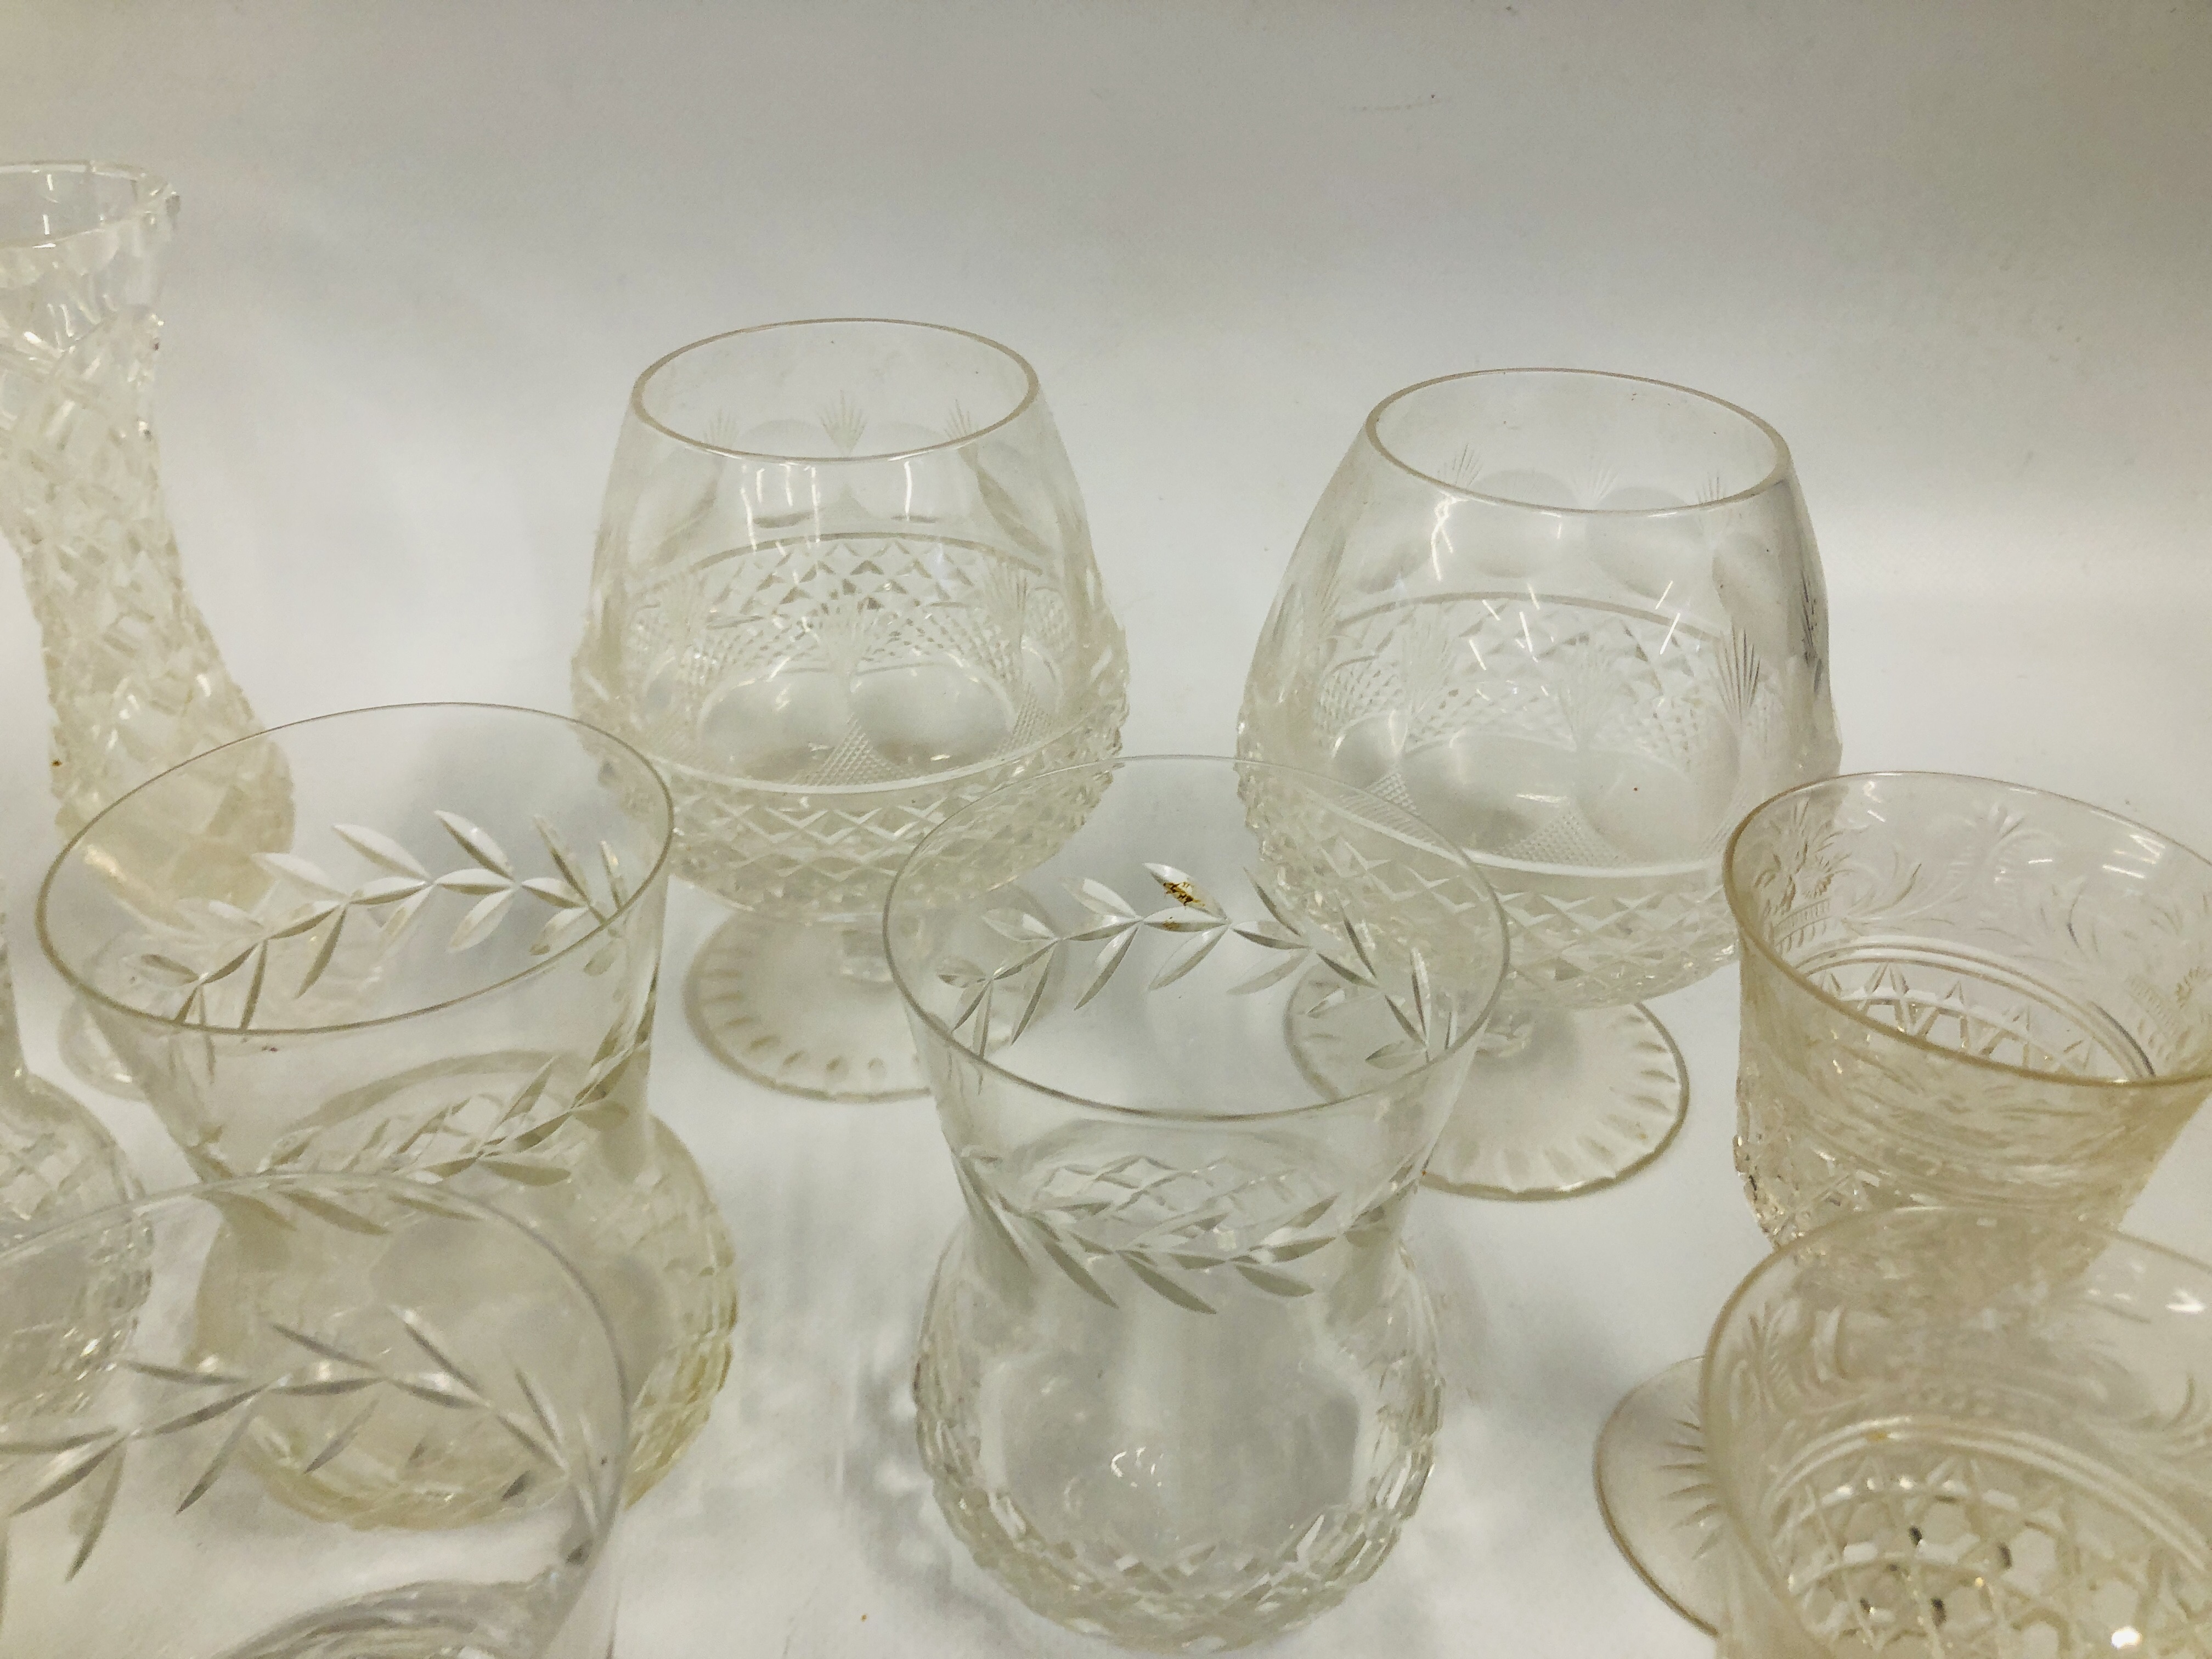 COLLECTION OF GOOD QUALITY ART GLASS CRYSTAL DRINKING GLASSES, VASE, BRANDY GLASSES, ETC. - Image 3 of 6